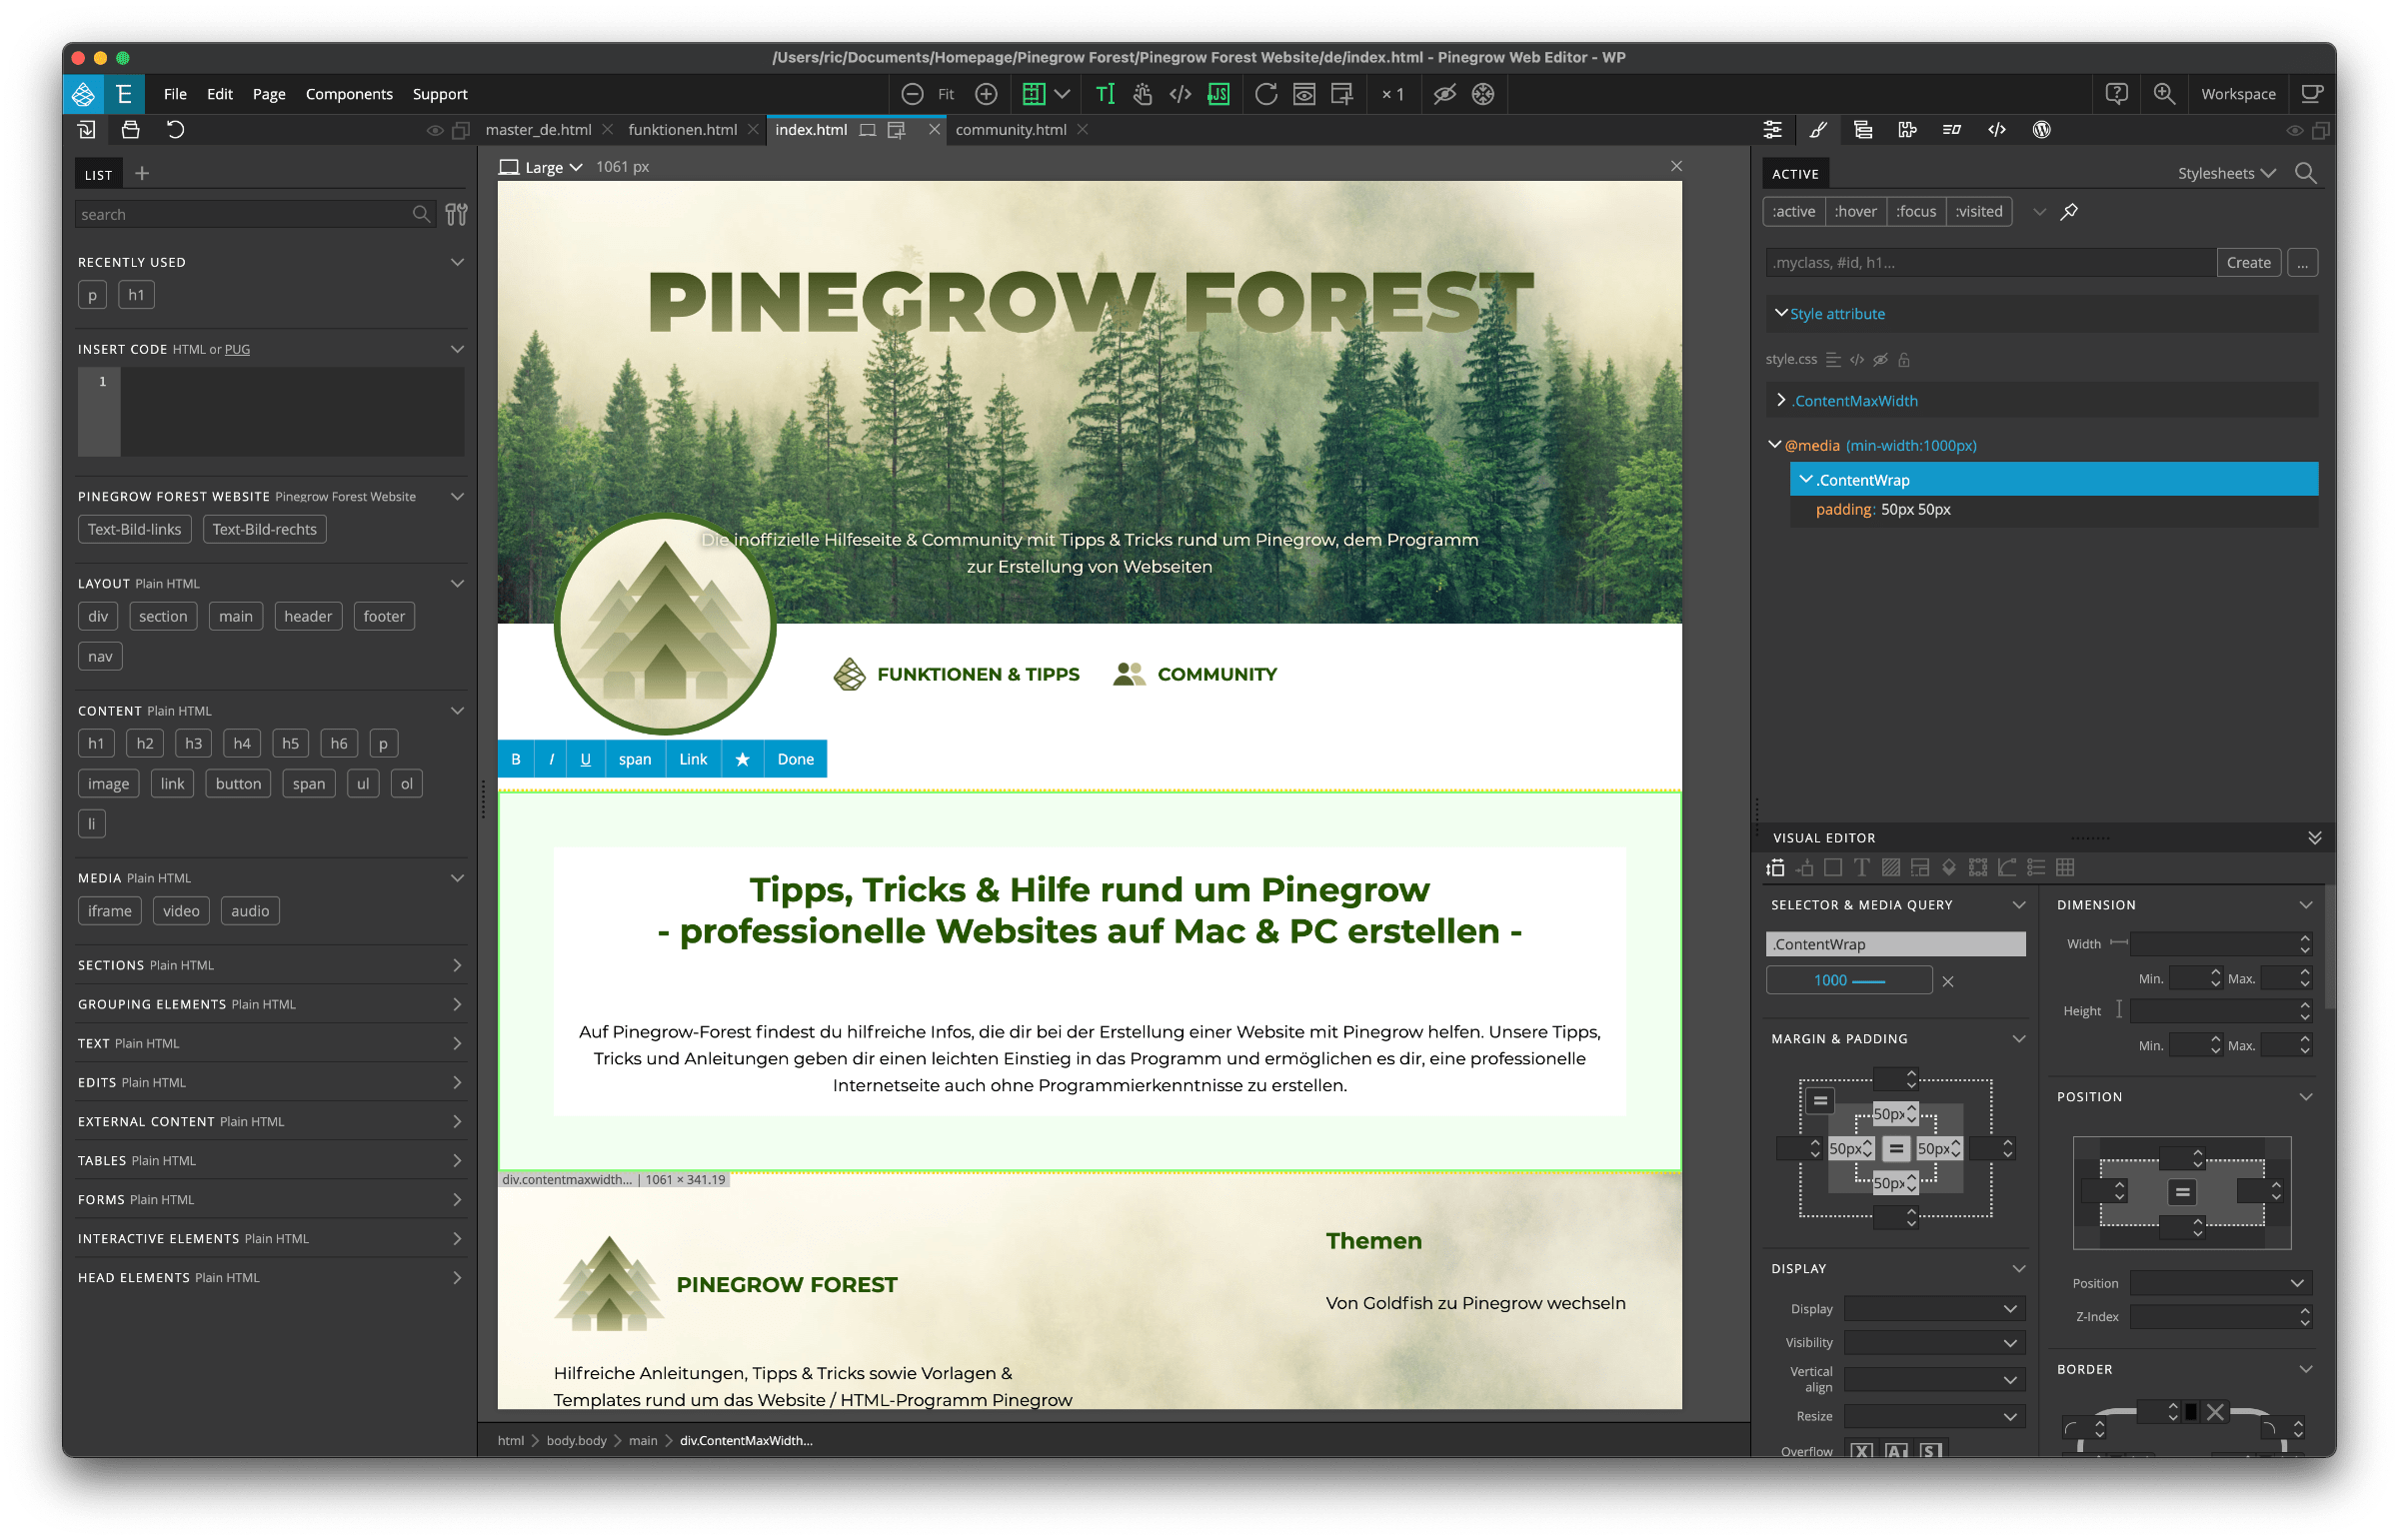 Pinegrow - The program for creating web pages for professionals with Pinegrow Forest project open